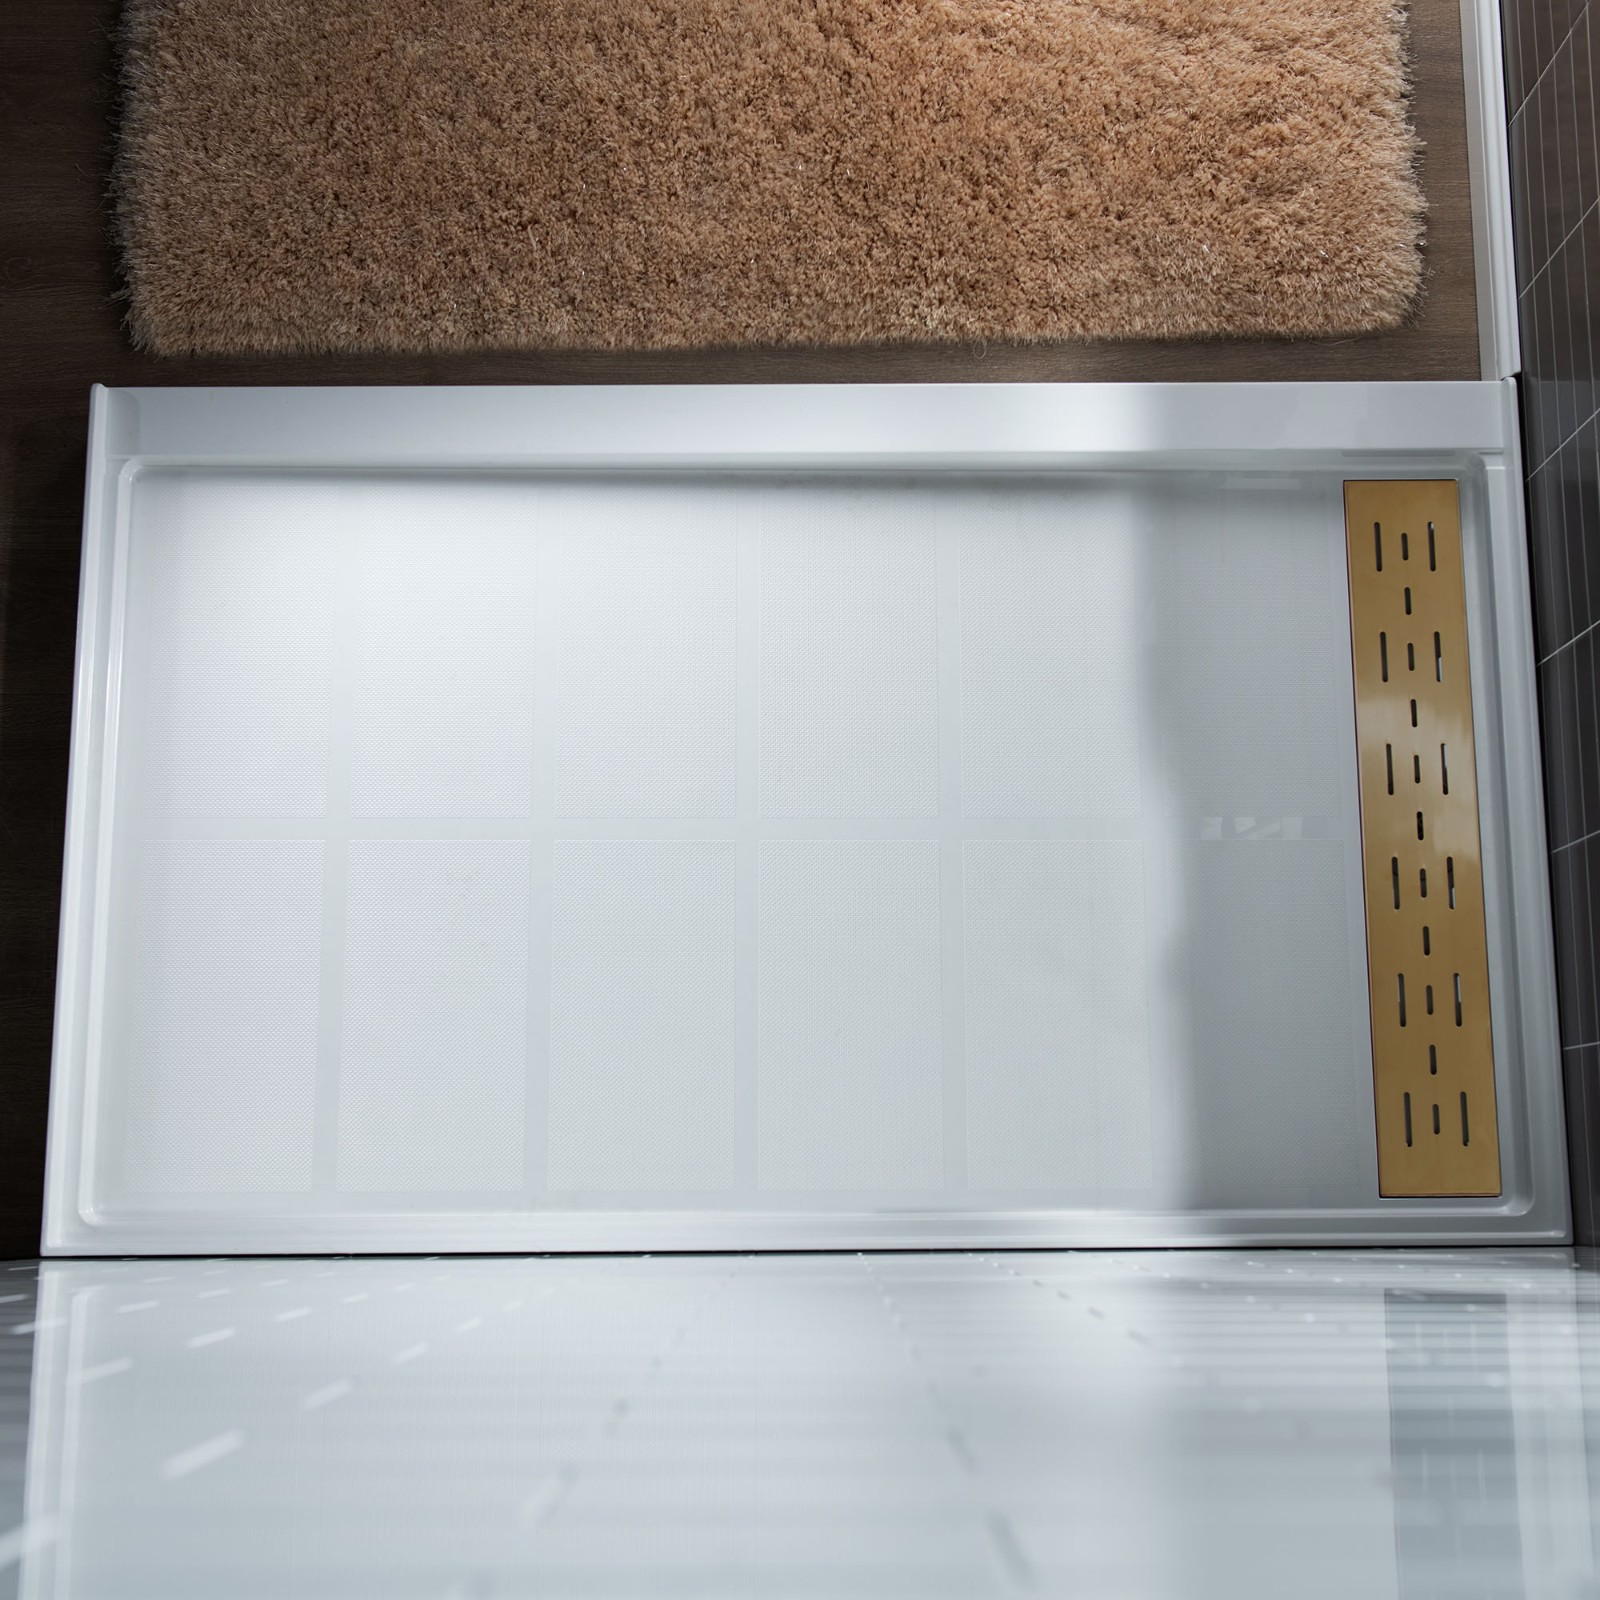  WOODBRIDGE SBR4832-1000R-BG SolidSurface Shower Base with Recessed Trench Side Including Brushed Gold Linear Cover, 48